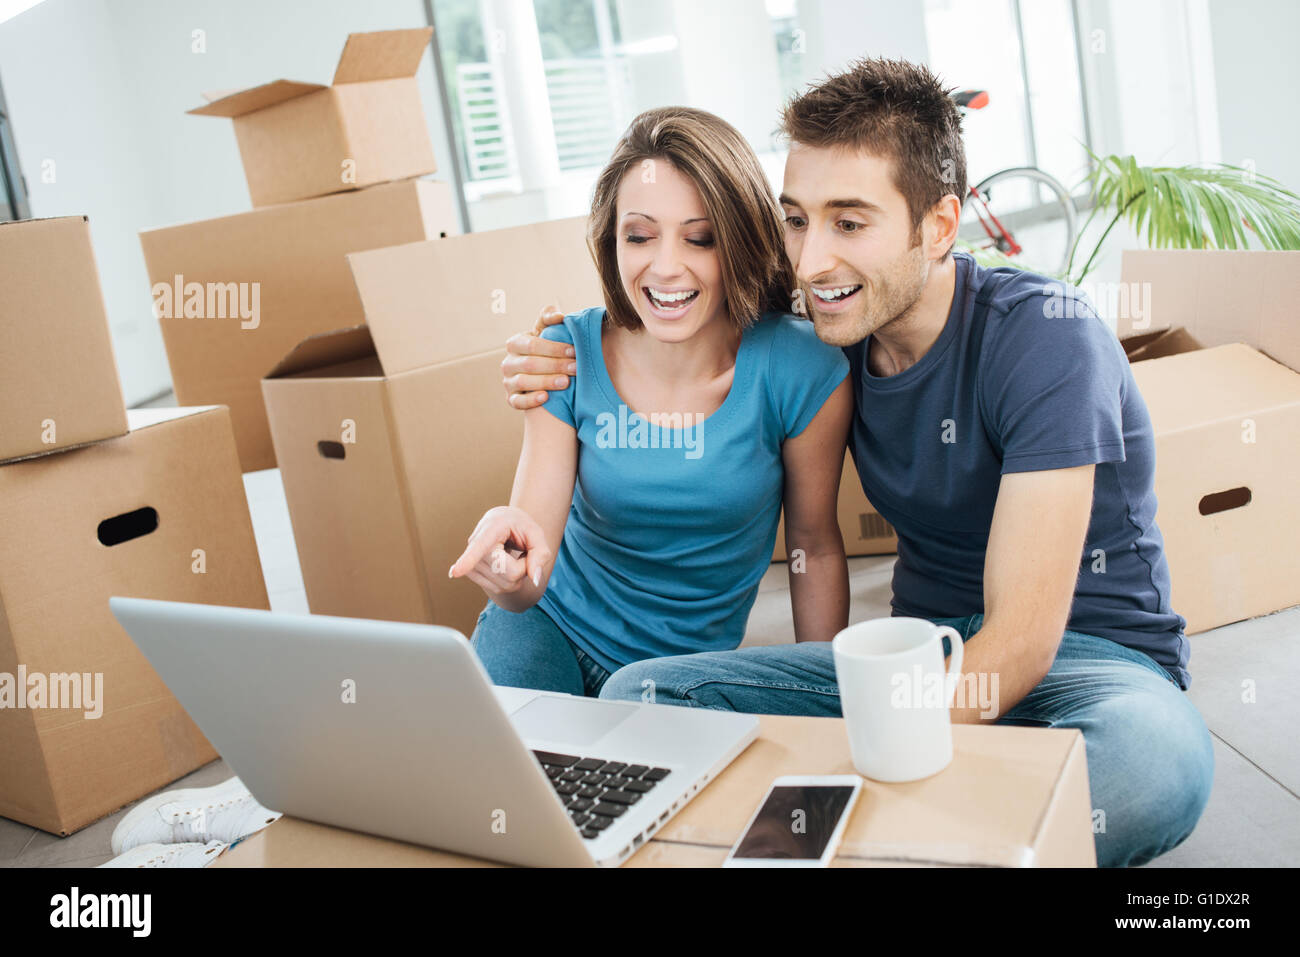 Smiling couple sitting on their new house floor surrounded by carton boxes, they are watching a funny video on a laptop and laug Stock Photo